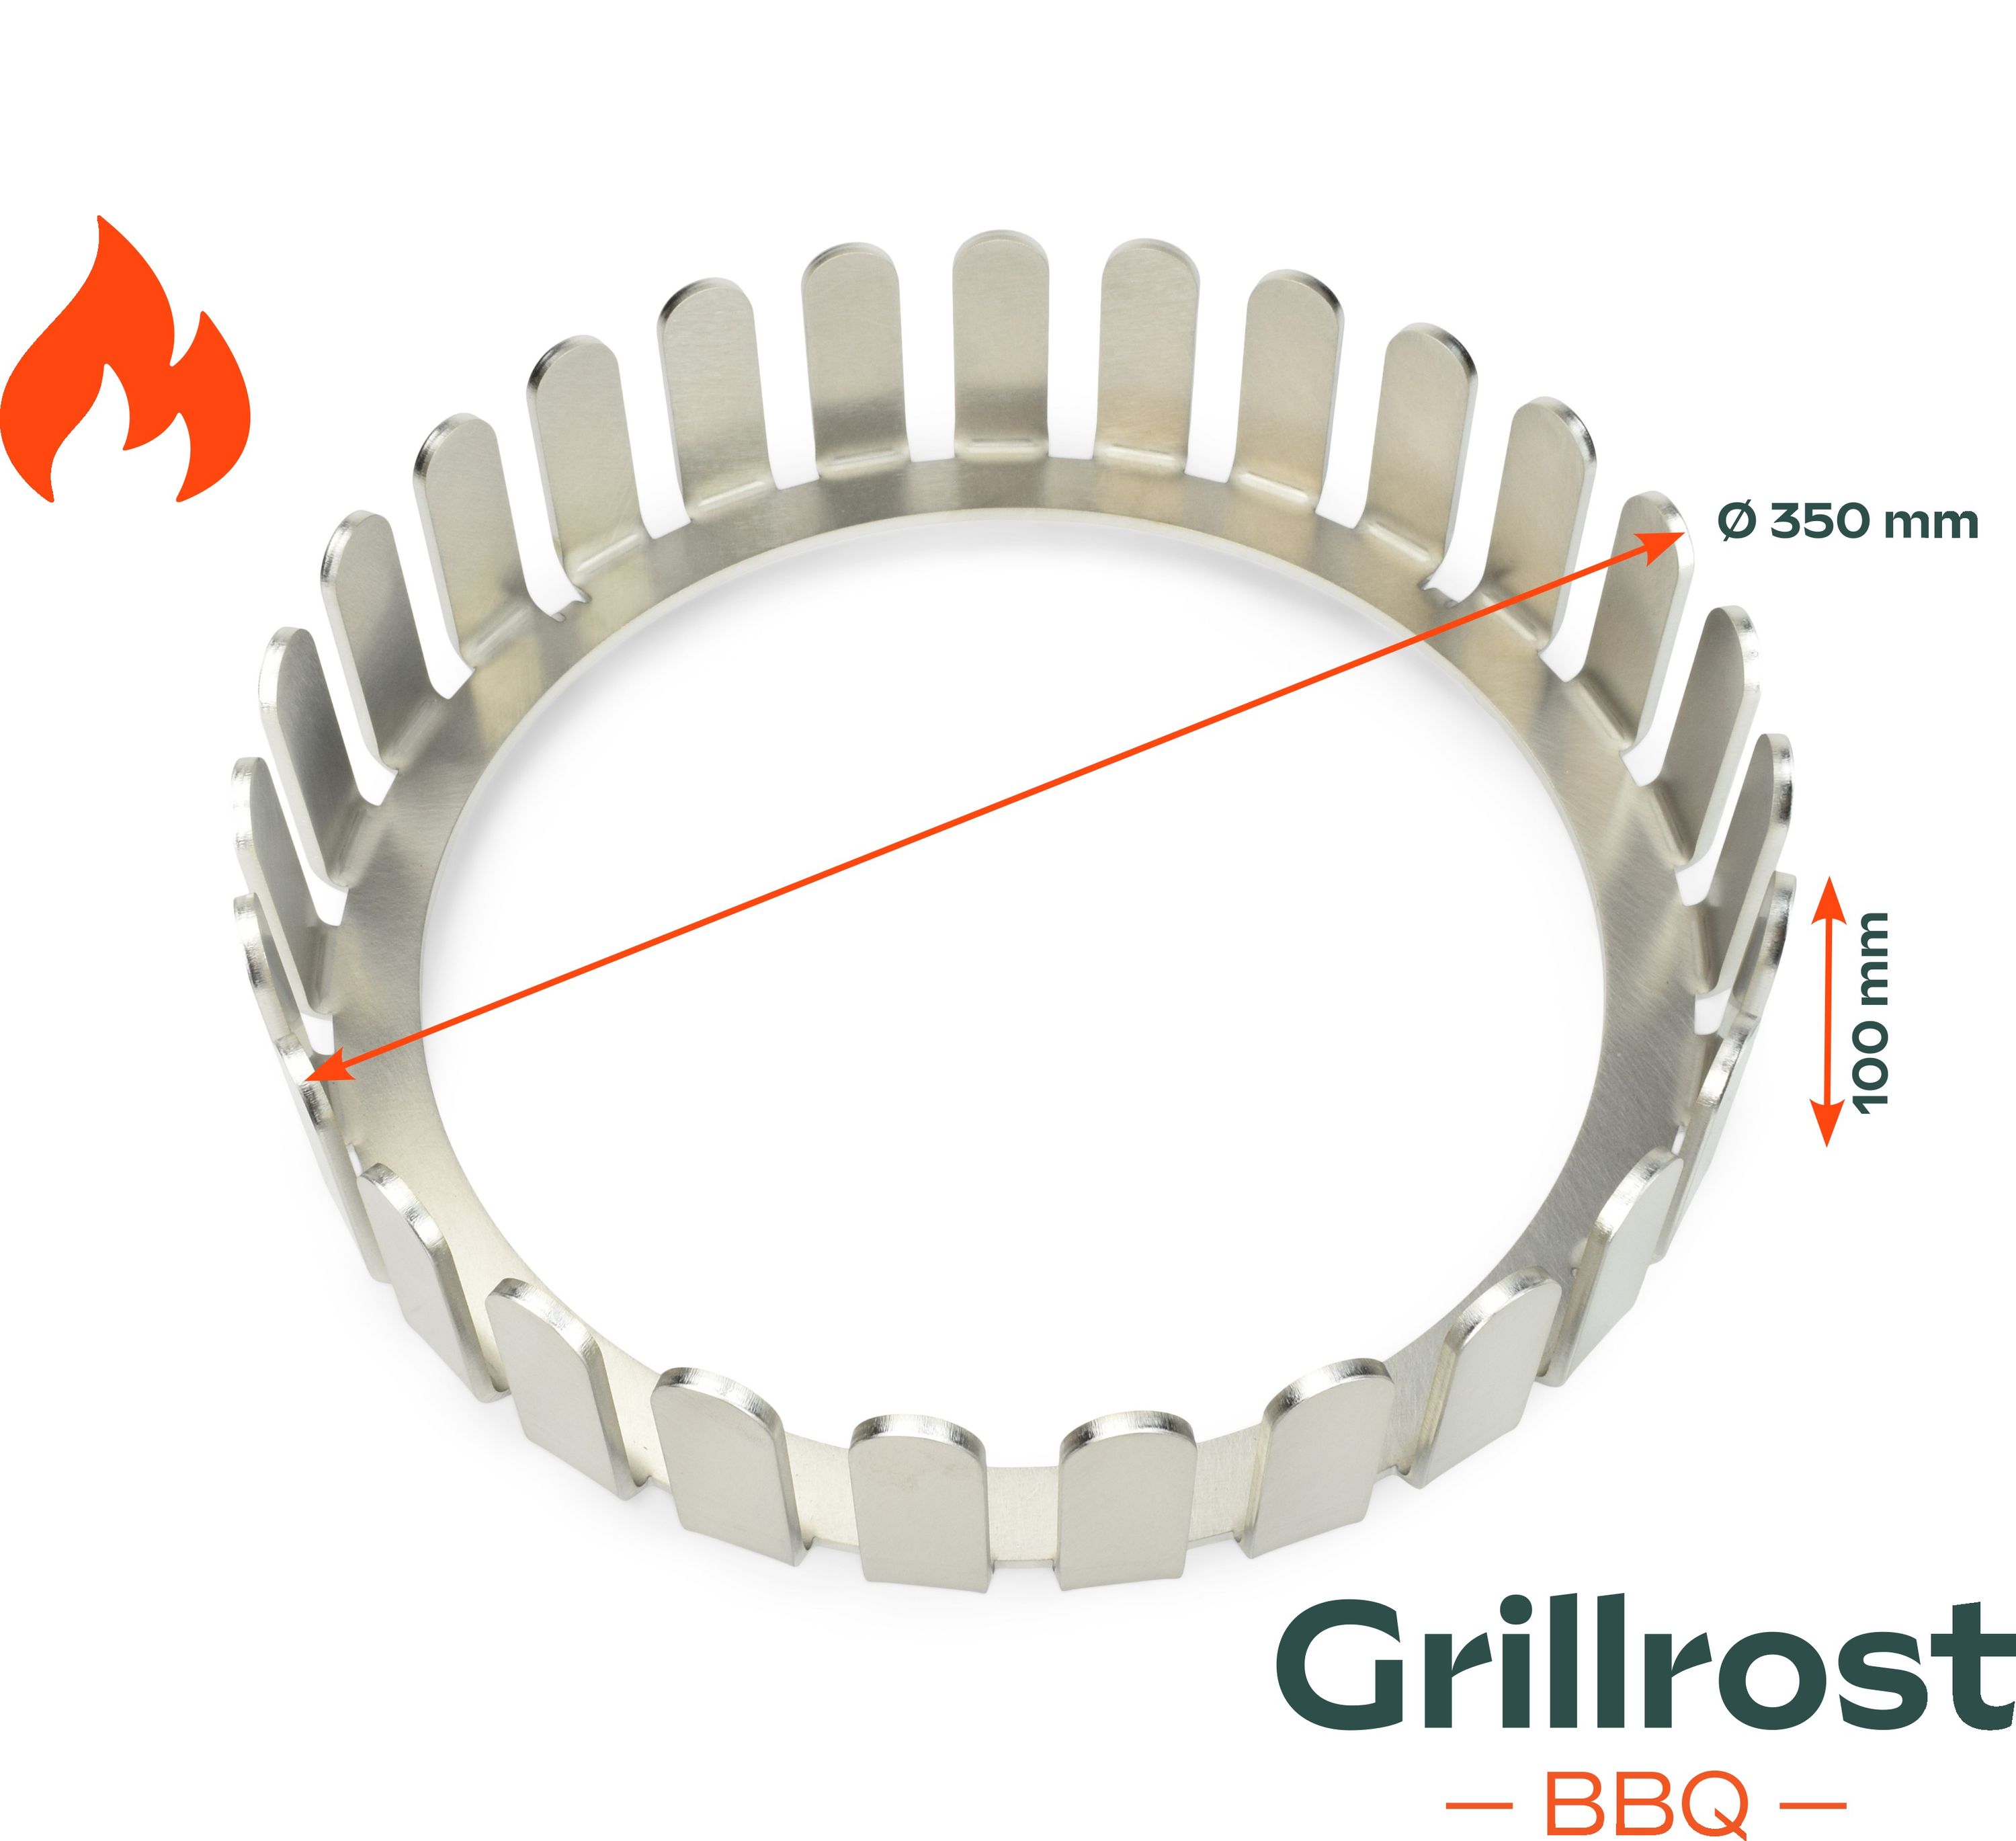 The fire plate grill Grill comb Solid and Imposing - 5mm Stainless Steel